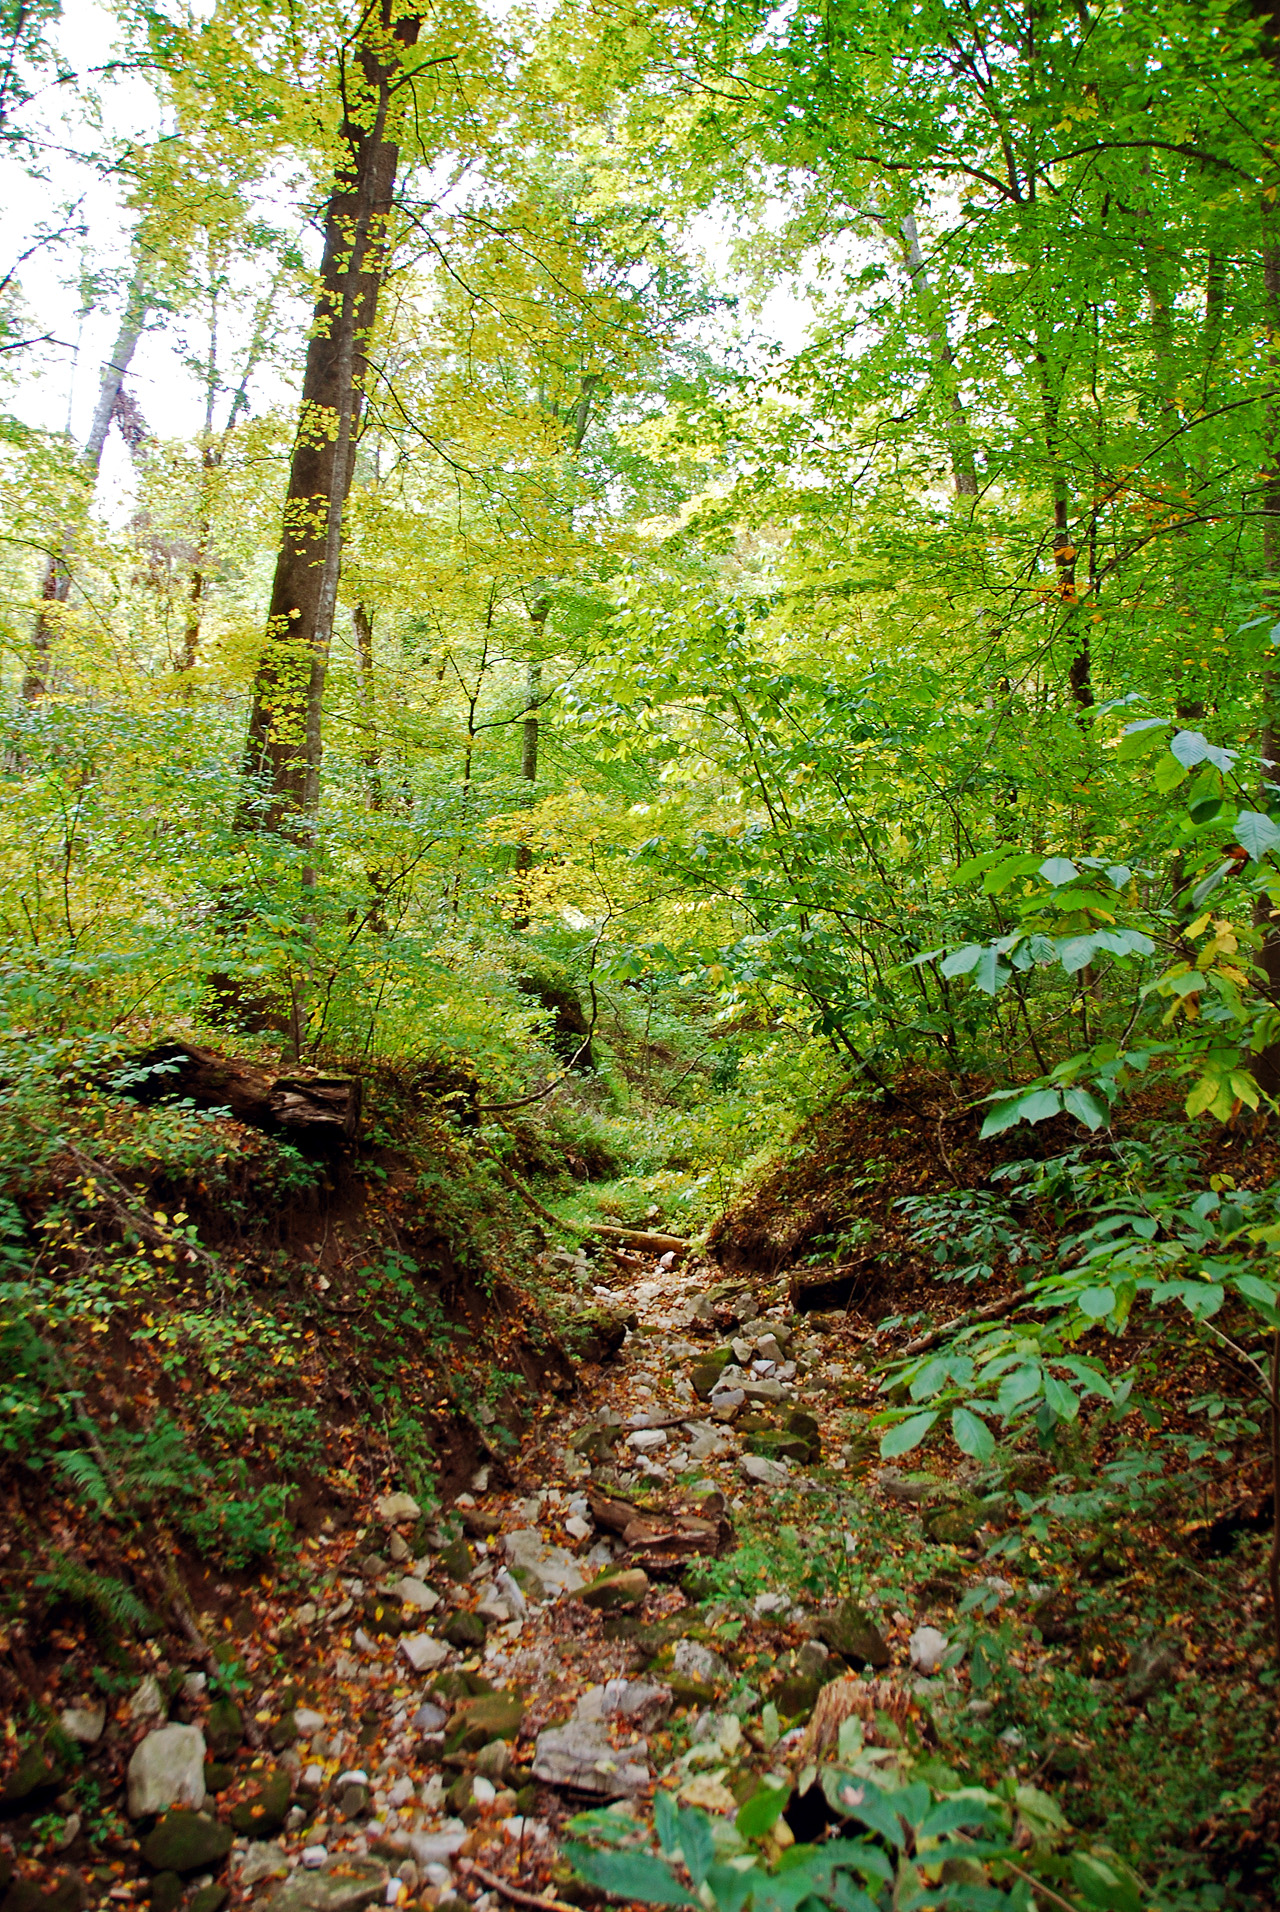 2012-10-12, 019, Mammoth Cave NP, KY